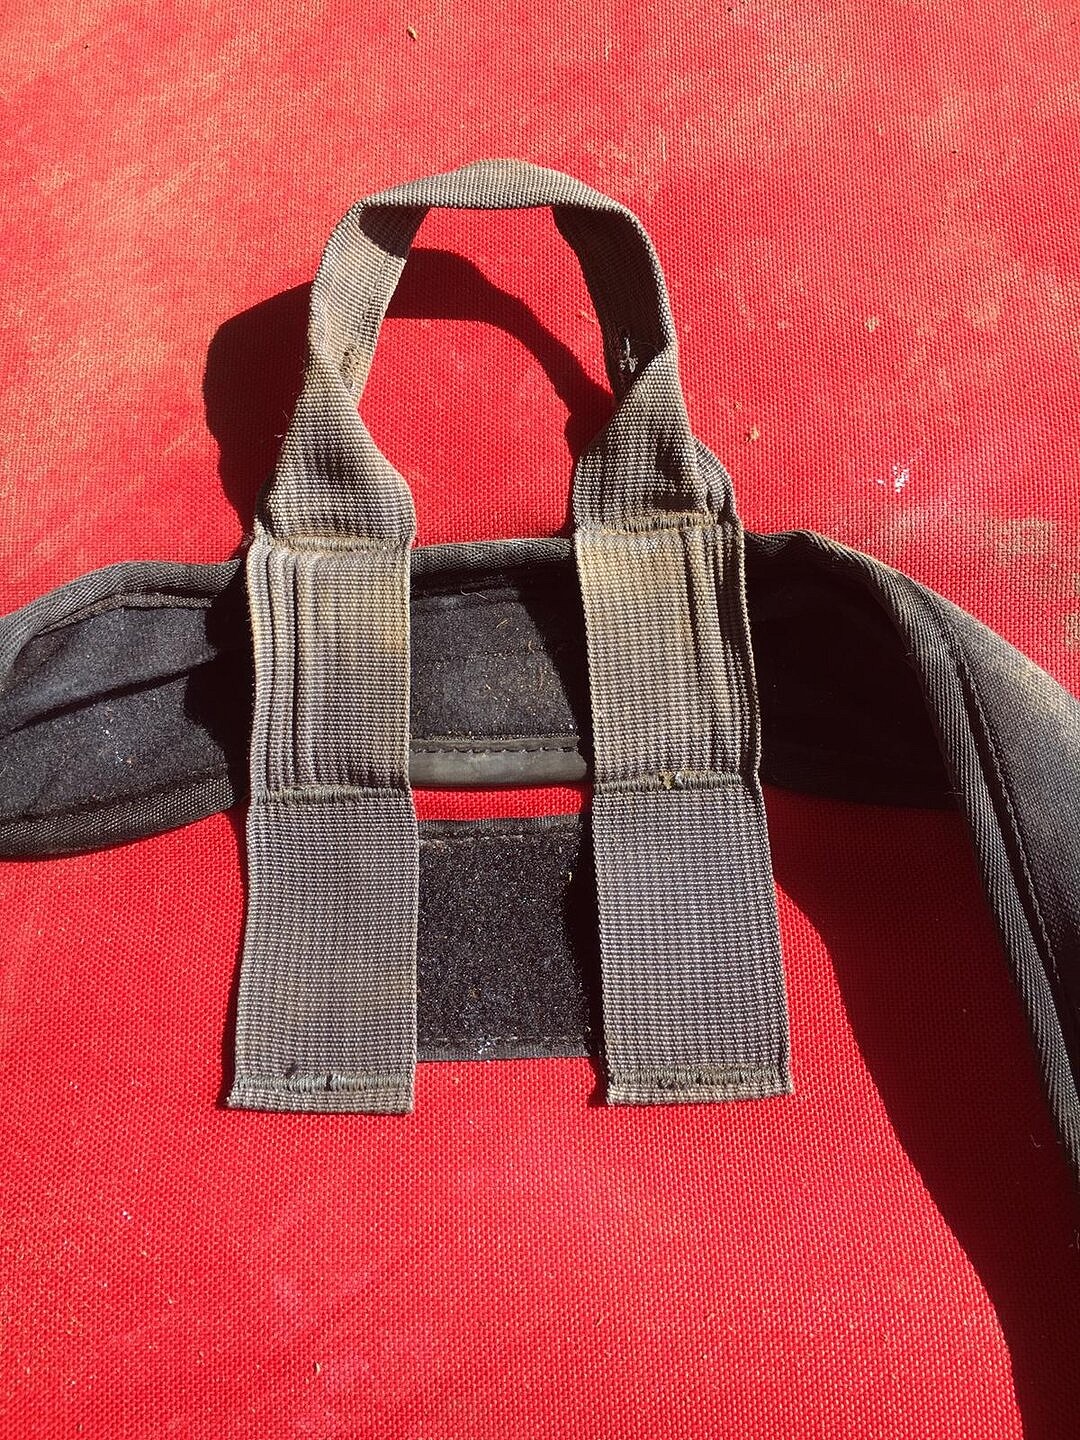 The velcro on the shoulder straps isn't strong enough to take the weight of the pad  © UKC Gear